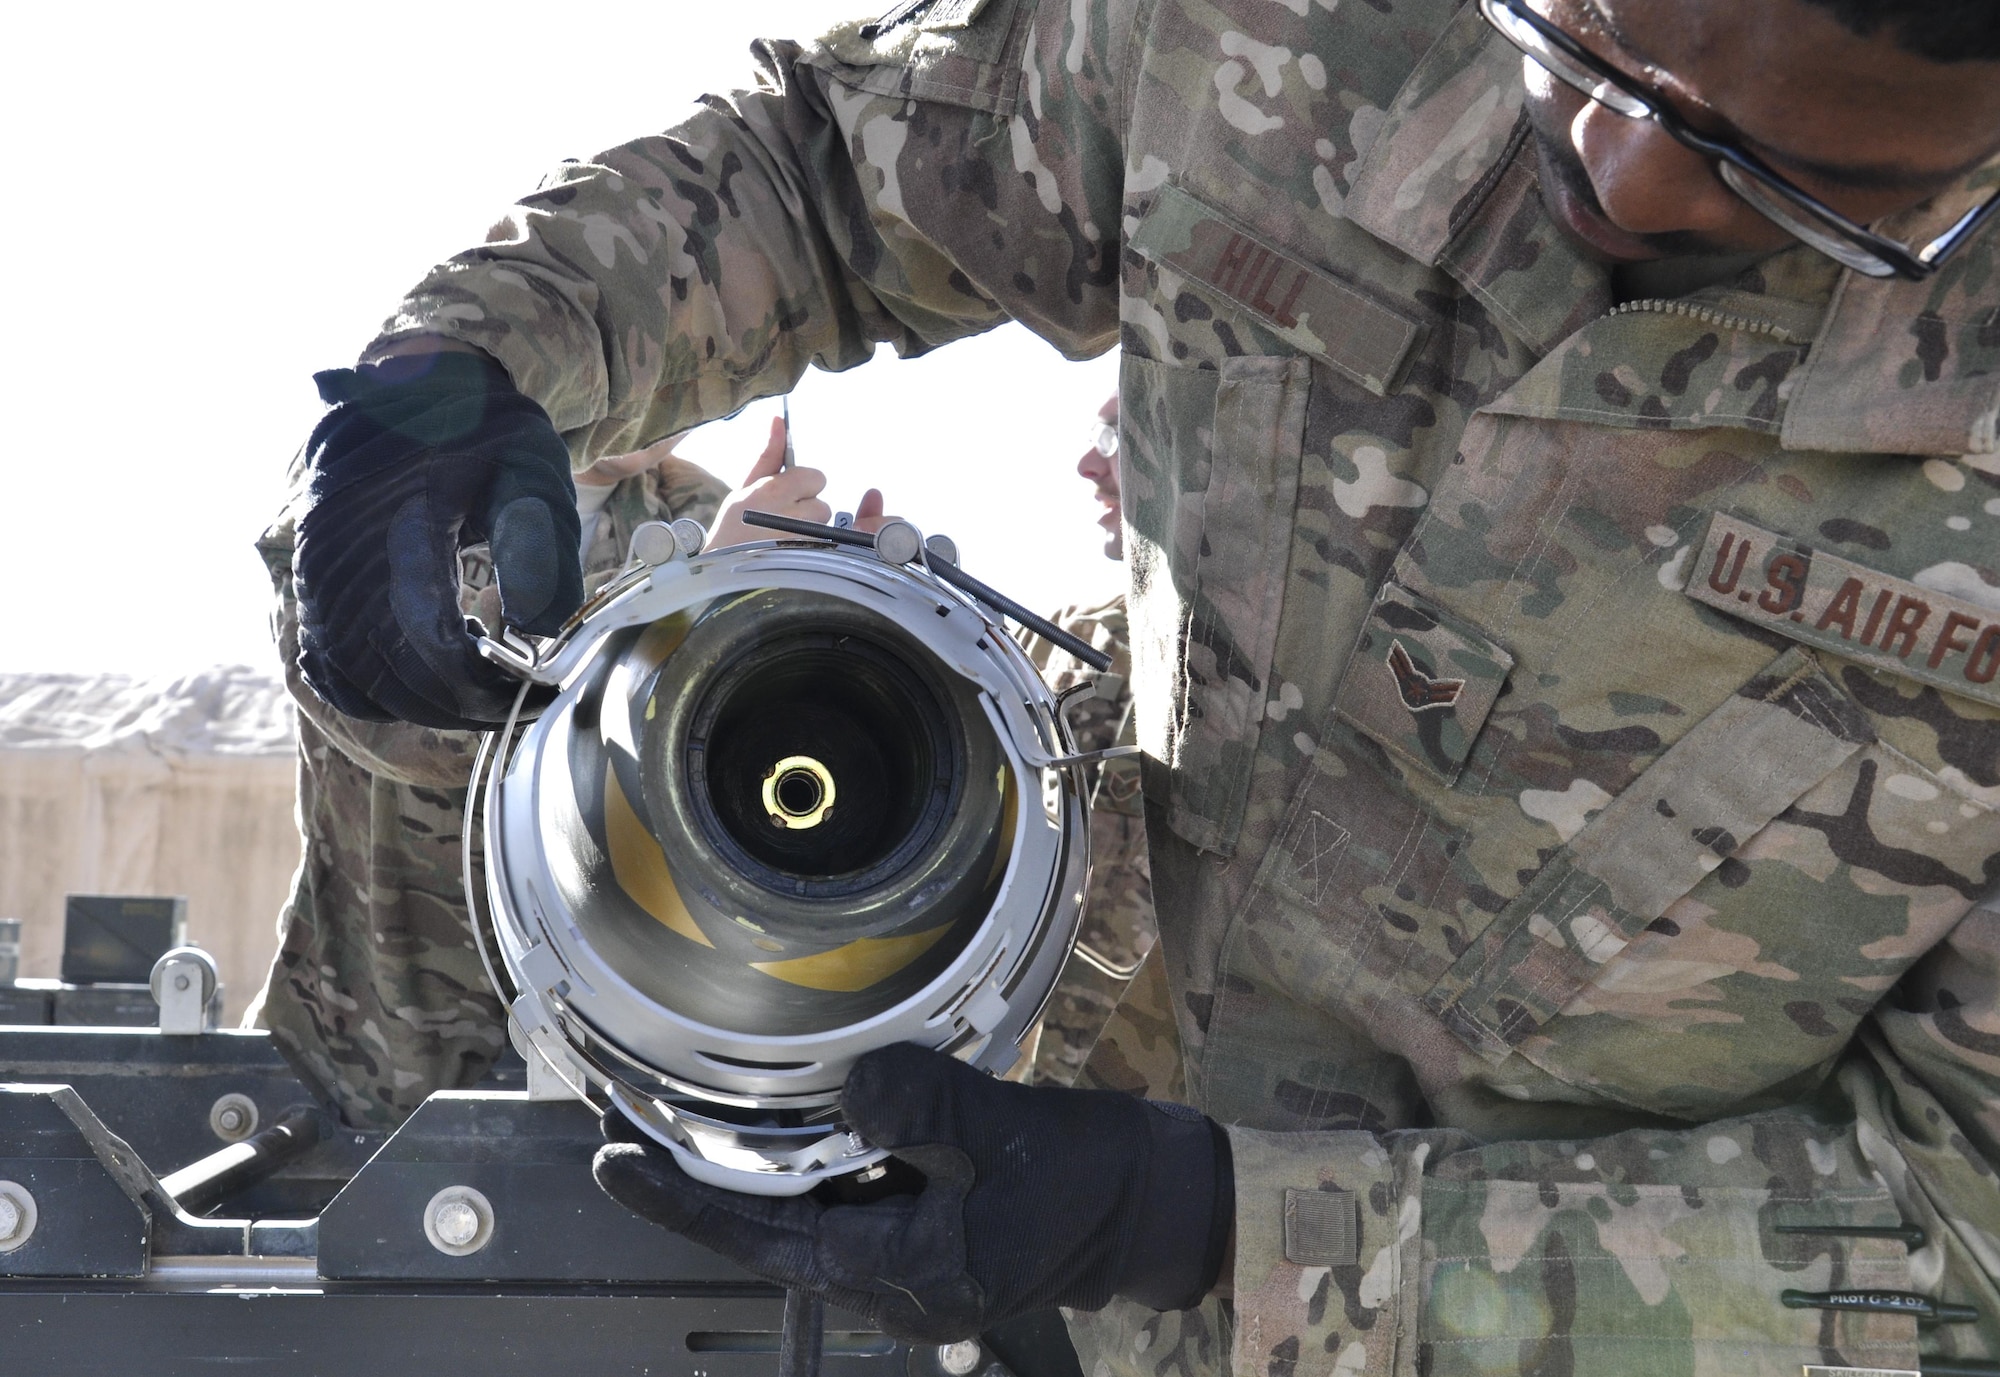 Airman 1st Class Deshawn Hill, 455th Expeditionary Maintenance Squadron munitions flight journeyman, deployed from Hill Air Force Base, Utah, installs a part while building GBU-54 500 pound bomb at Bagram Airfield, Afghanistan, Nov. 17, 2015. The AMMO flight provides necessary weapons and countermeasures required to project combat airpower. (U.S. Air Force photo by Tech. Sgt. Nicholas Rau/Released)